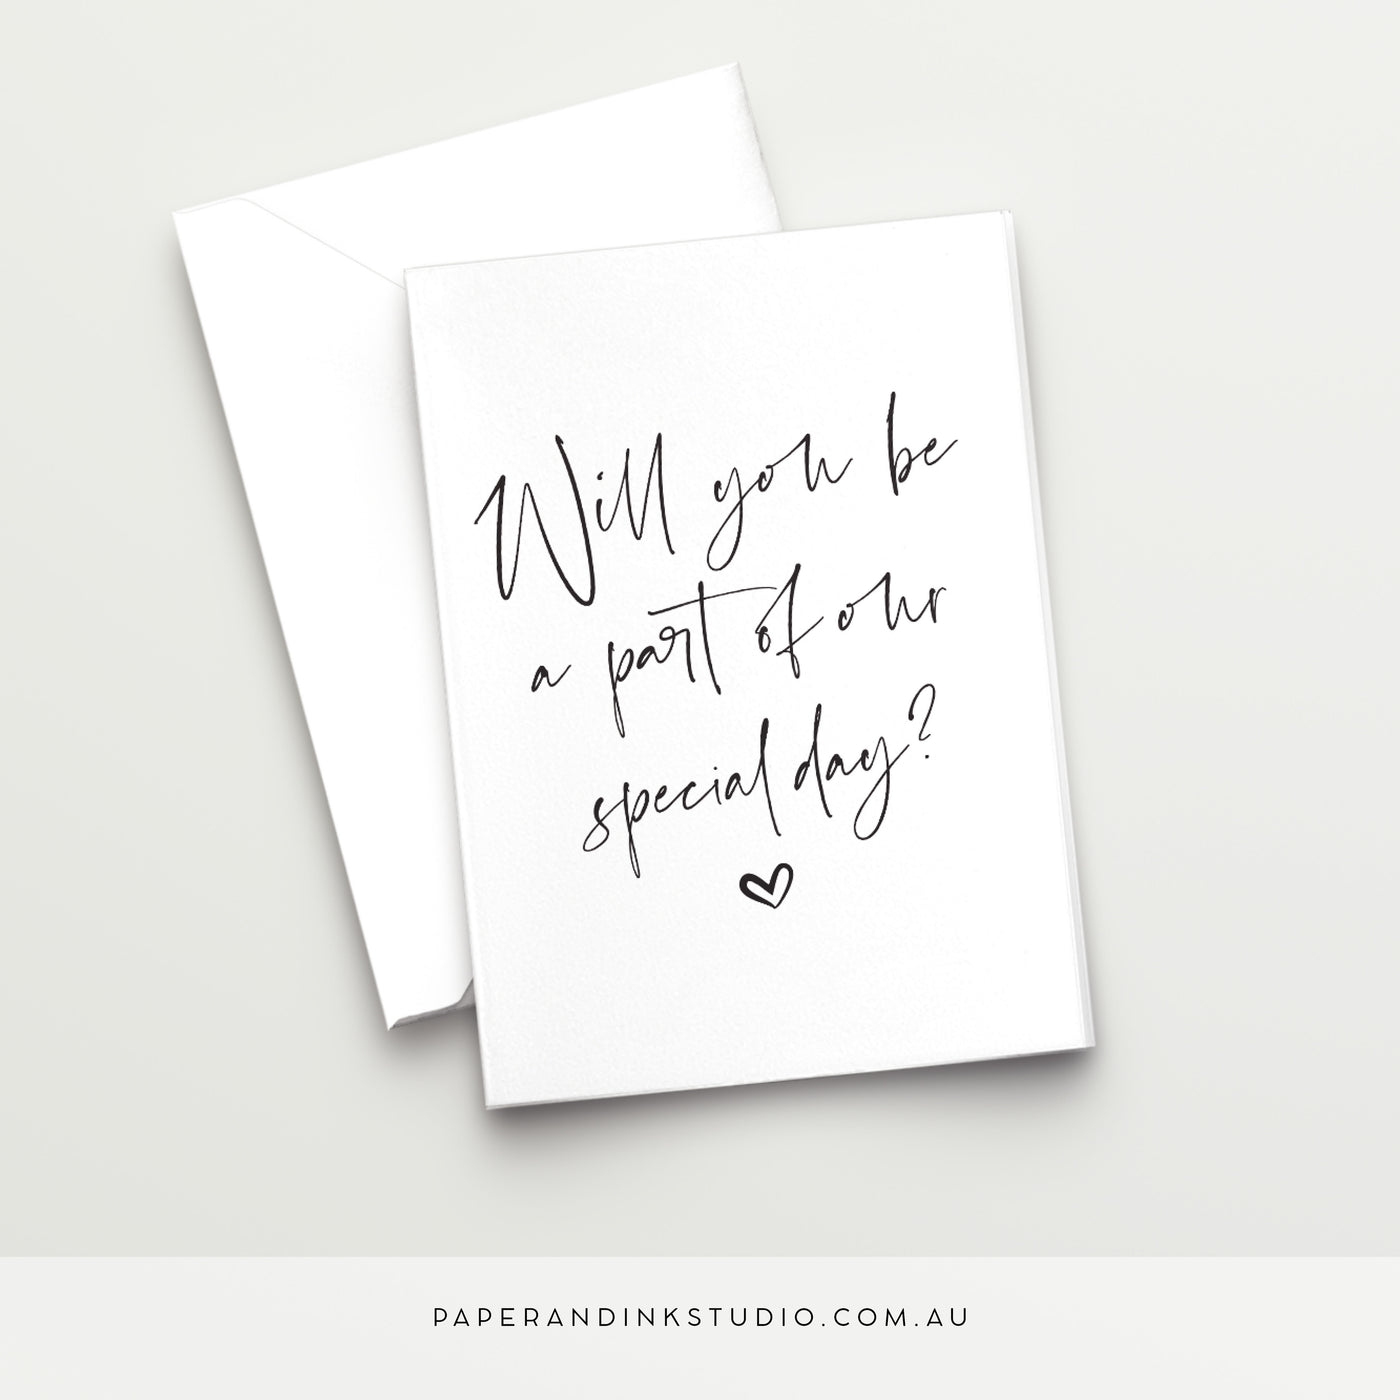 A white folded wedding or best woman card in a design called Thorne with black writing that says will you be a part of our special day, asking your friend to be part of your wedding party or involved in helping on your wedding.